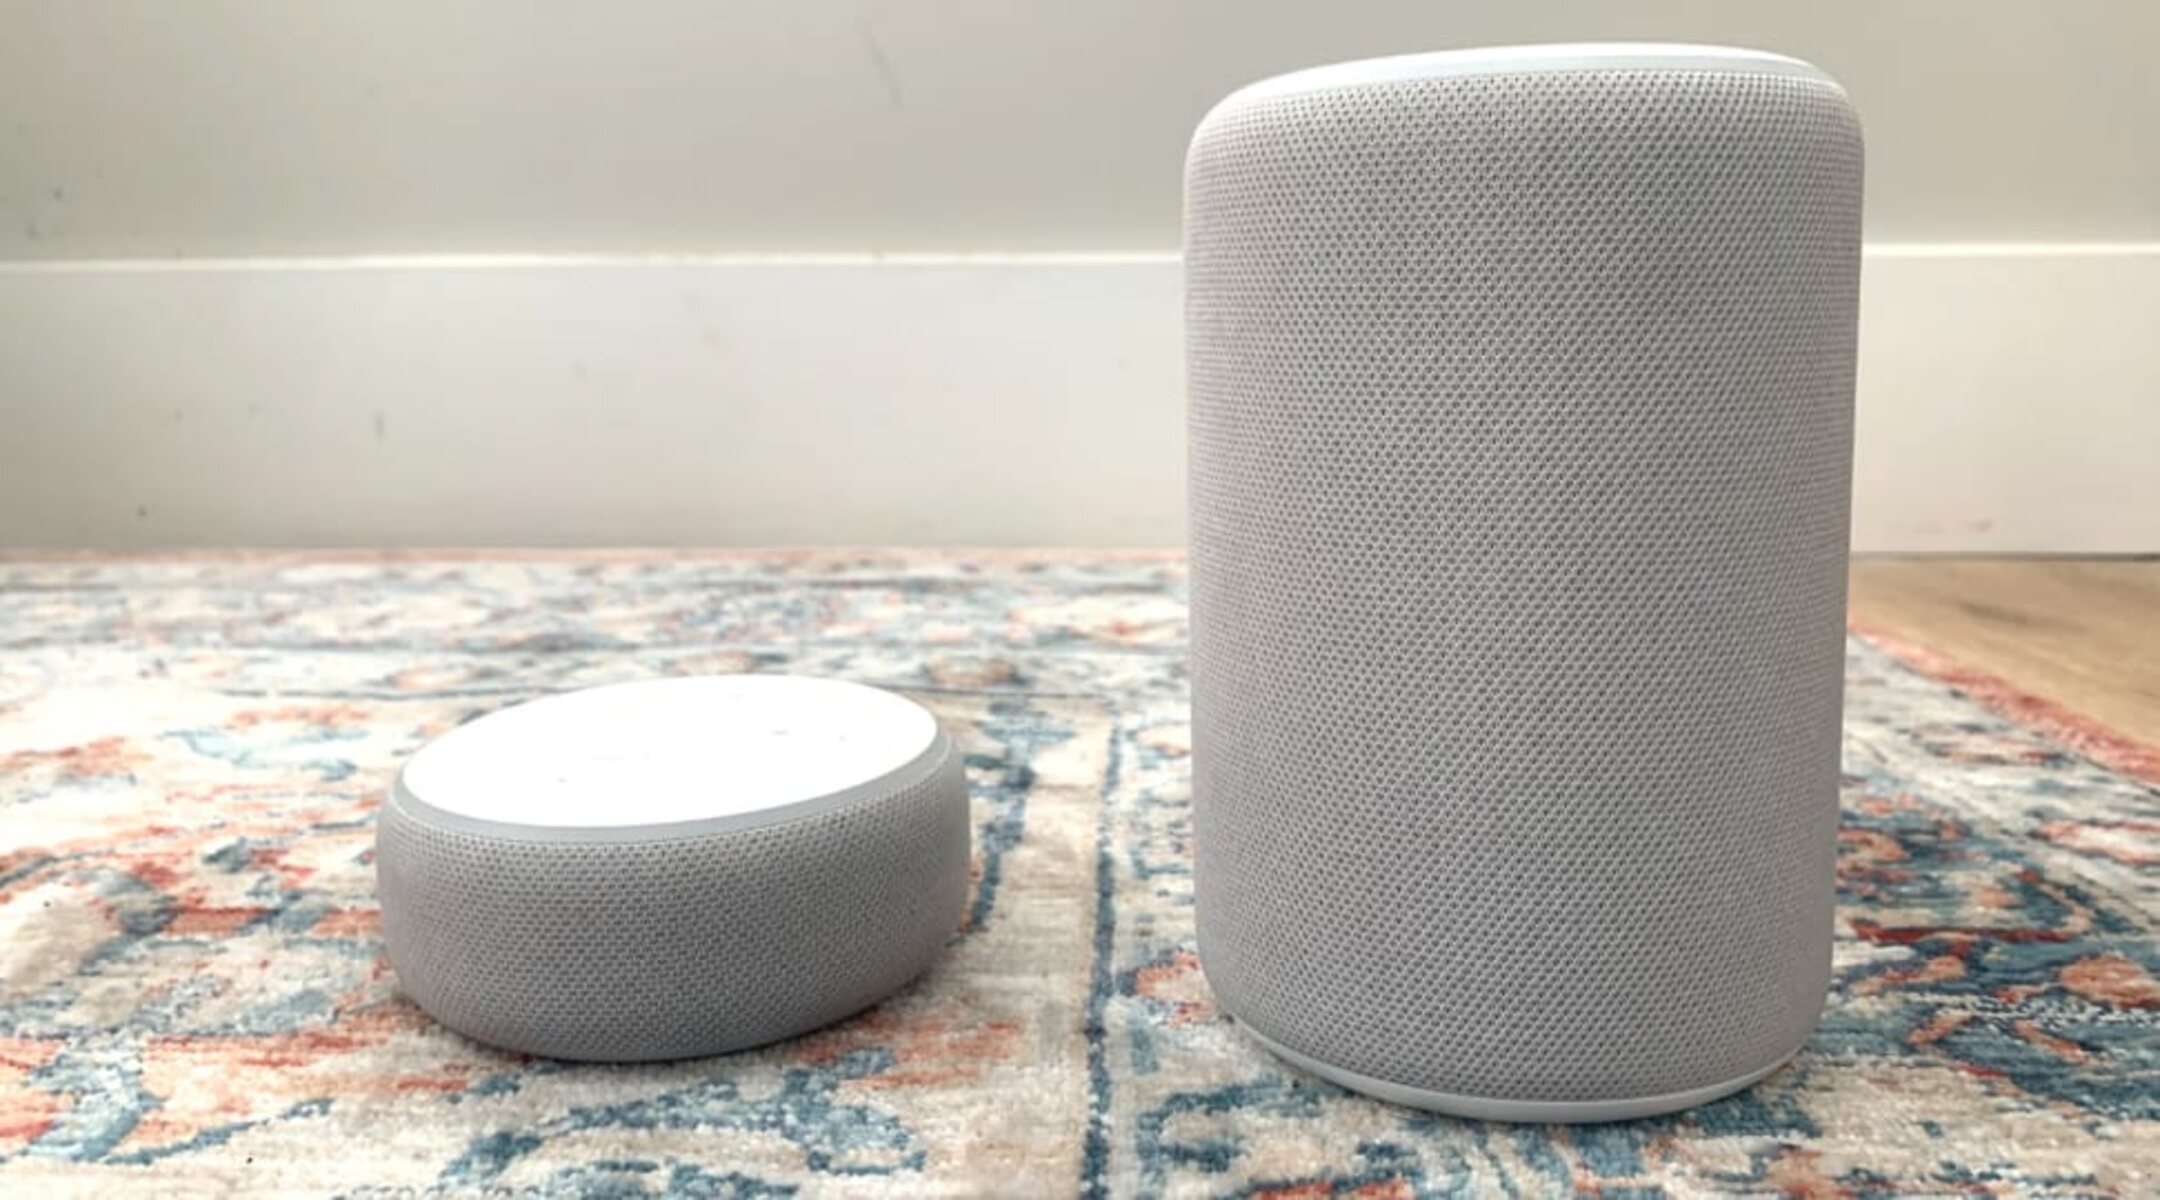 What Is The Difference Between An Echo Dot And An Echo Smart Speaker